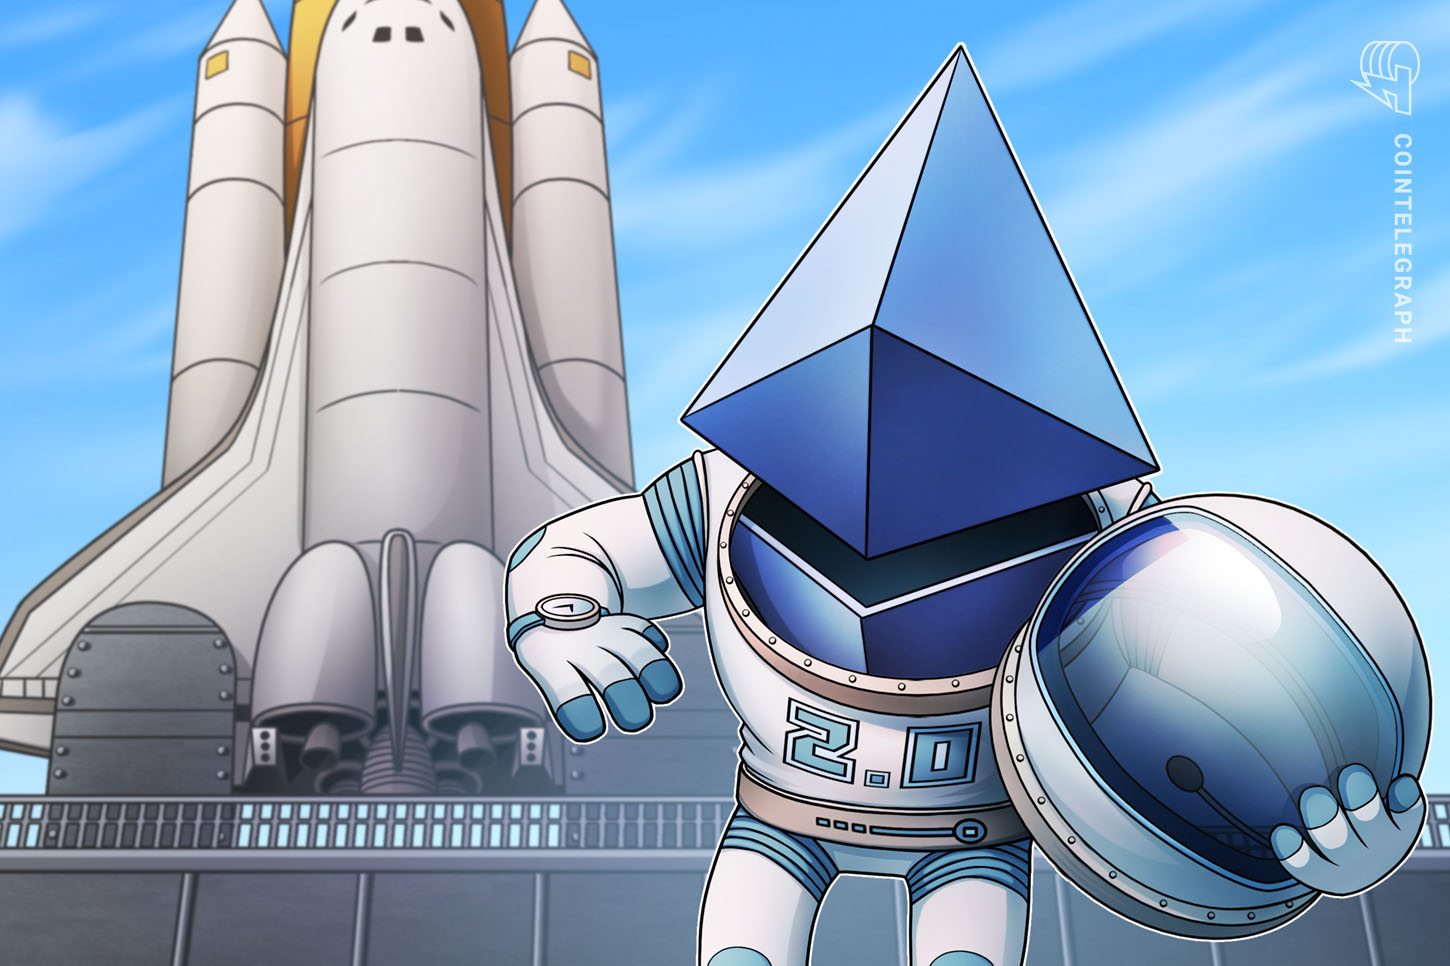 Second Ethereum 2.Zero launch rehearsal places it on observe for 2020 launch